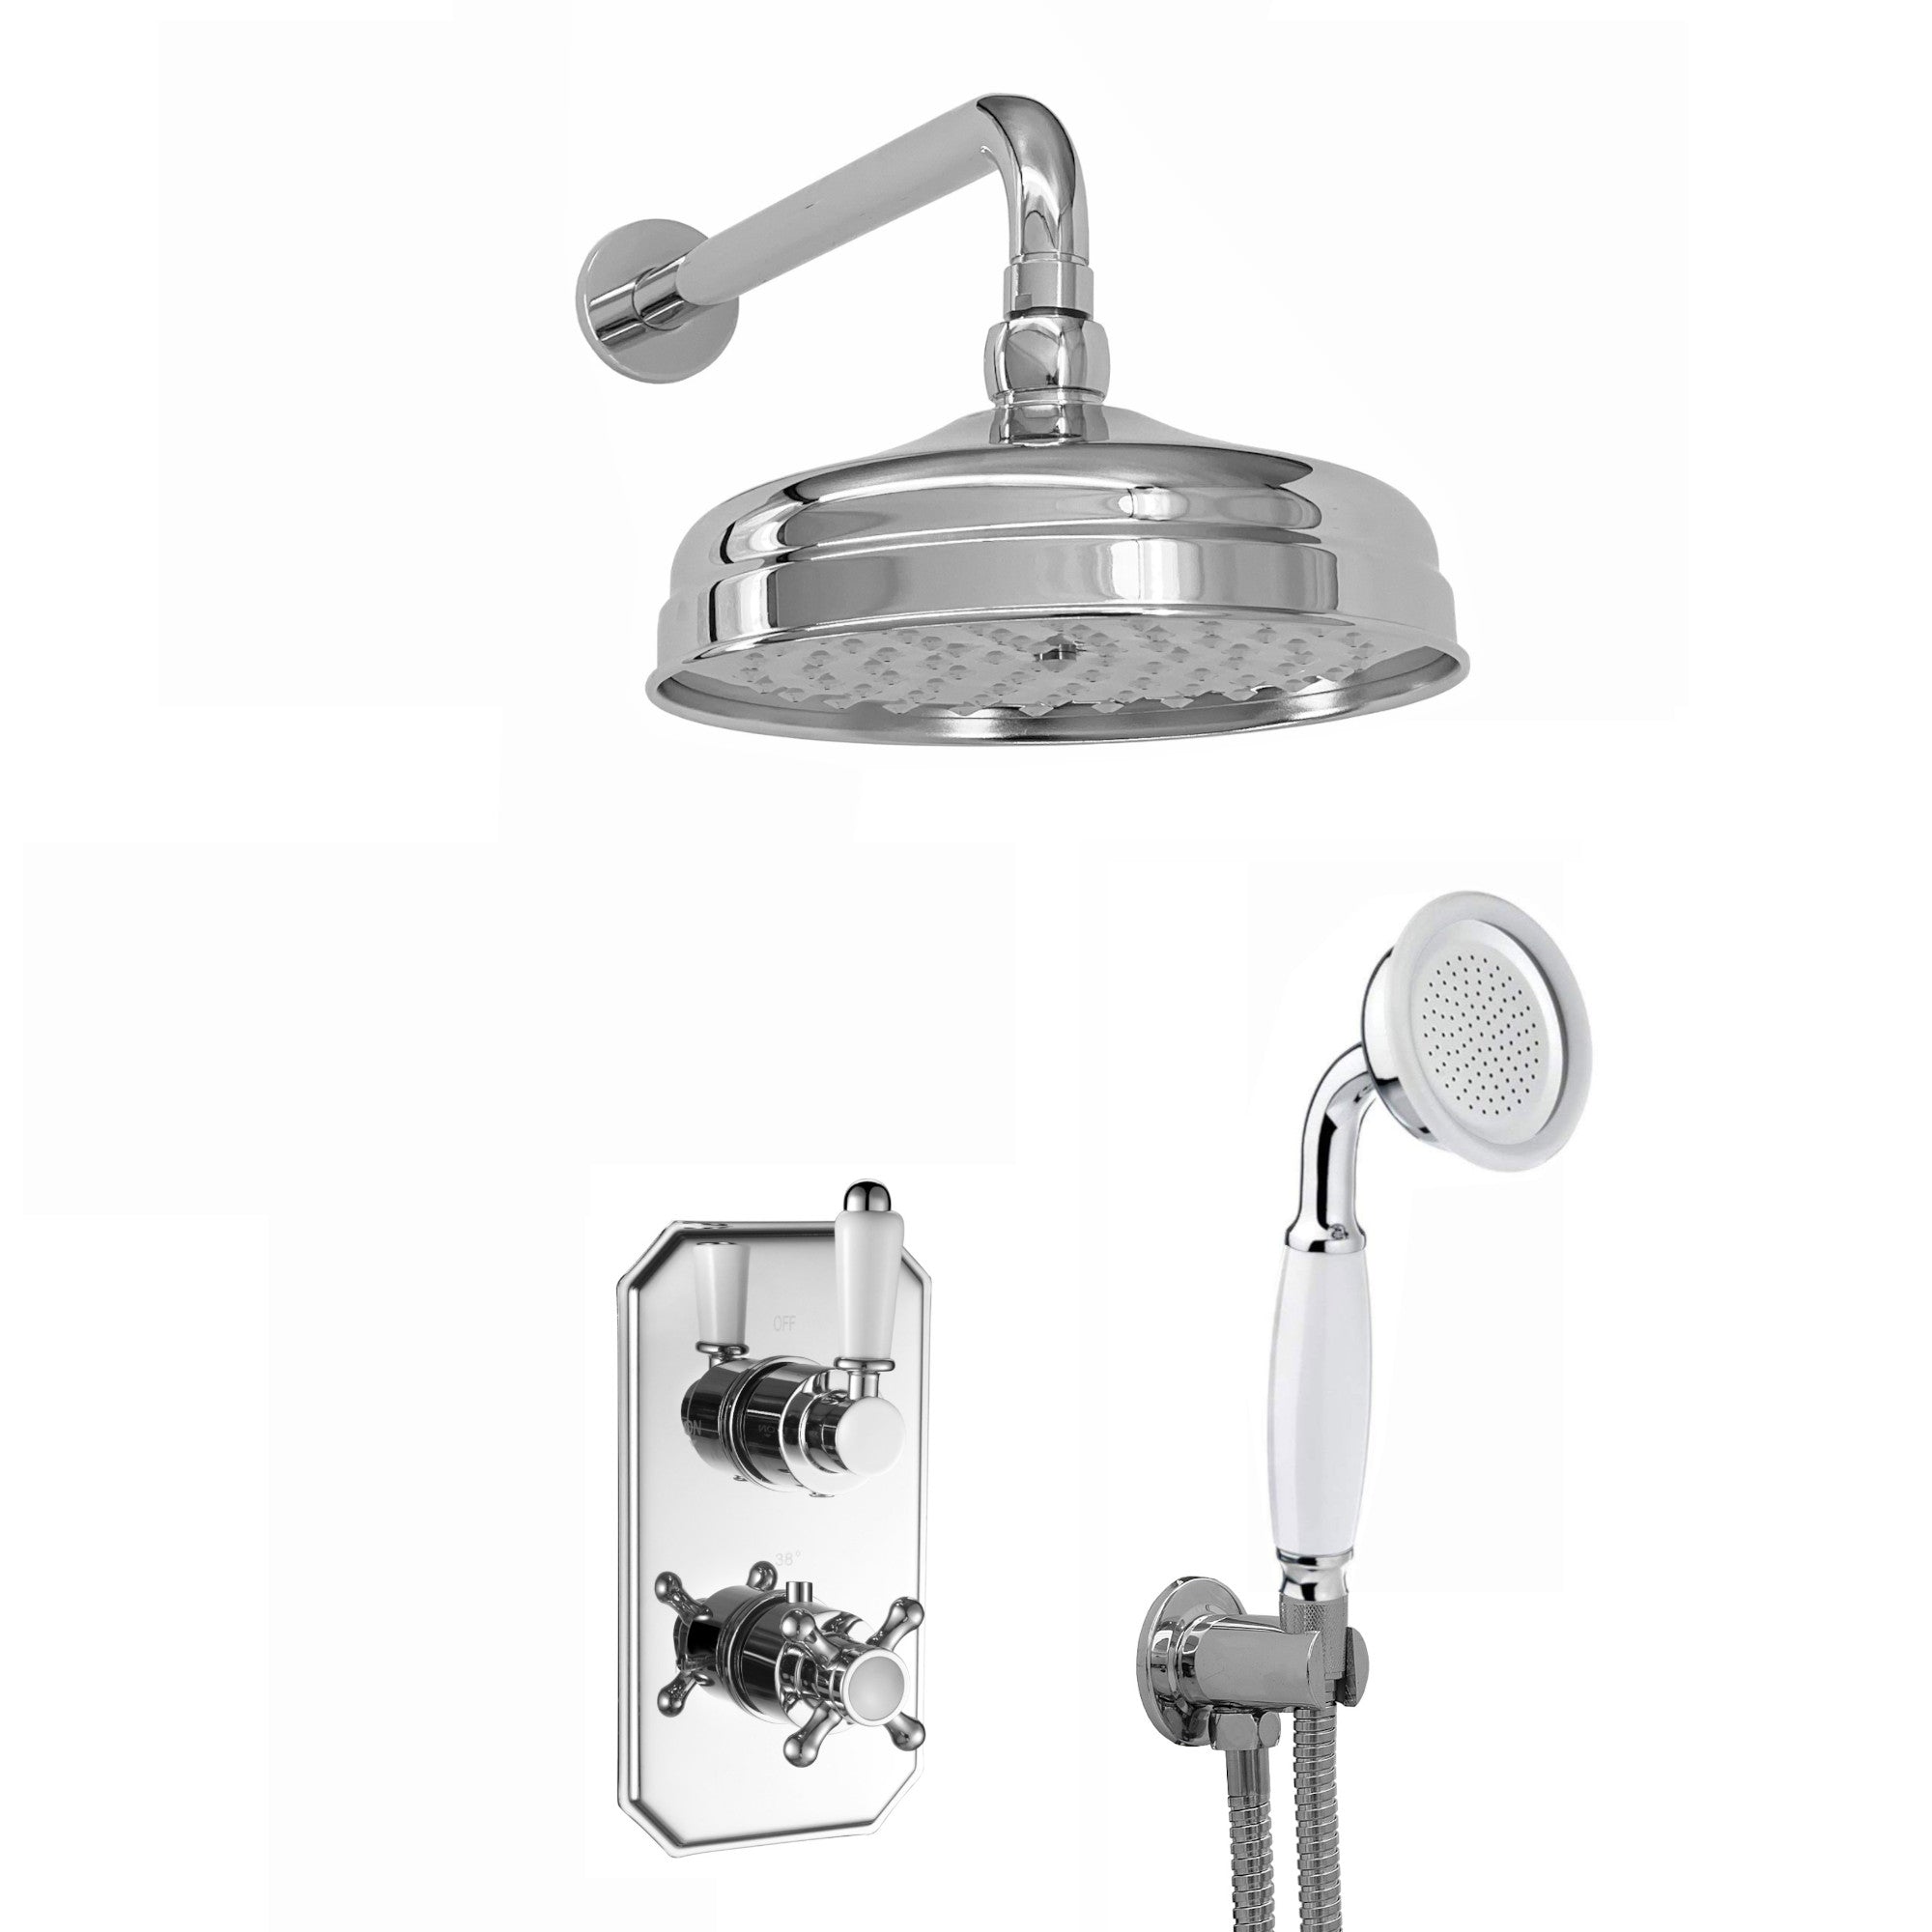 Regent Traditional Crosshead And White Lever Concealed Thermostatic Shower Set Incl. Twin Valve, Wall Fixed 8" Shower Head, Handshower Kit - Chrome (2 Outlet)